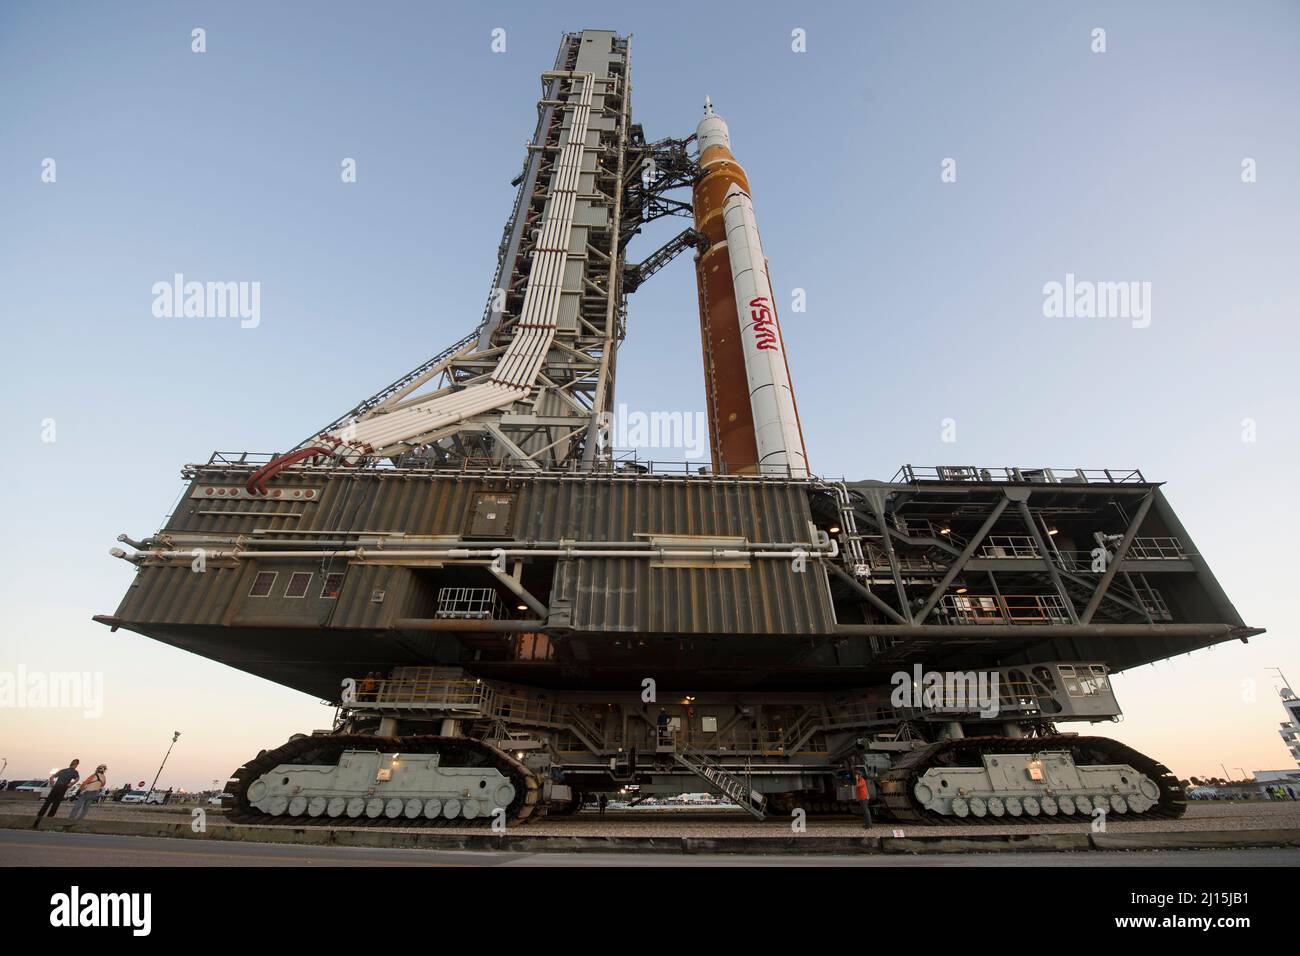 NASA’s Space Launch System (SLS) rocket with the Orion spacecraft aboard is seen atop a mobile launcher as it rolls out to Launch Complex 39B for the first time, Thursday, March 17, 2022, at NASA’s Kennedy Space Center in Florida. Ahead of NASA’s Artemis I flight test, the fully stacked and integrated SLS rocket and Orion spacecraft will undergo a wet dress rehearsal at Launch Complex 39B to verify systems and practice countdown procedures for the first launch. Photo Credit: (NASA/Aubrey Gemignani) Stock Photo